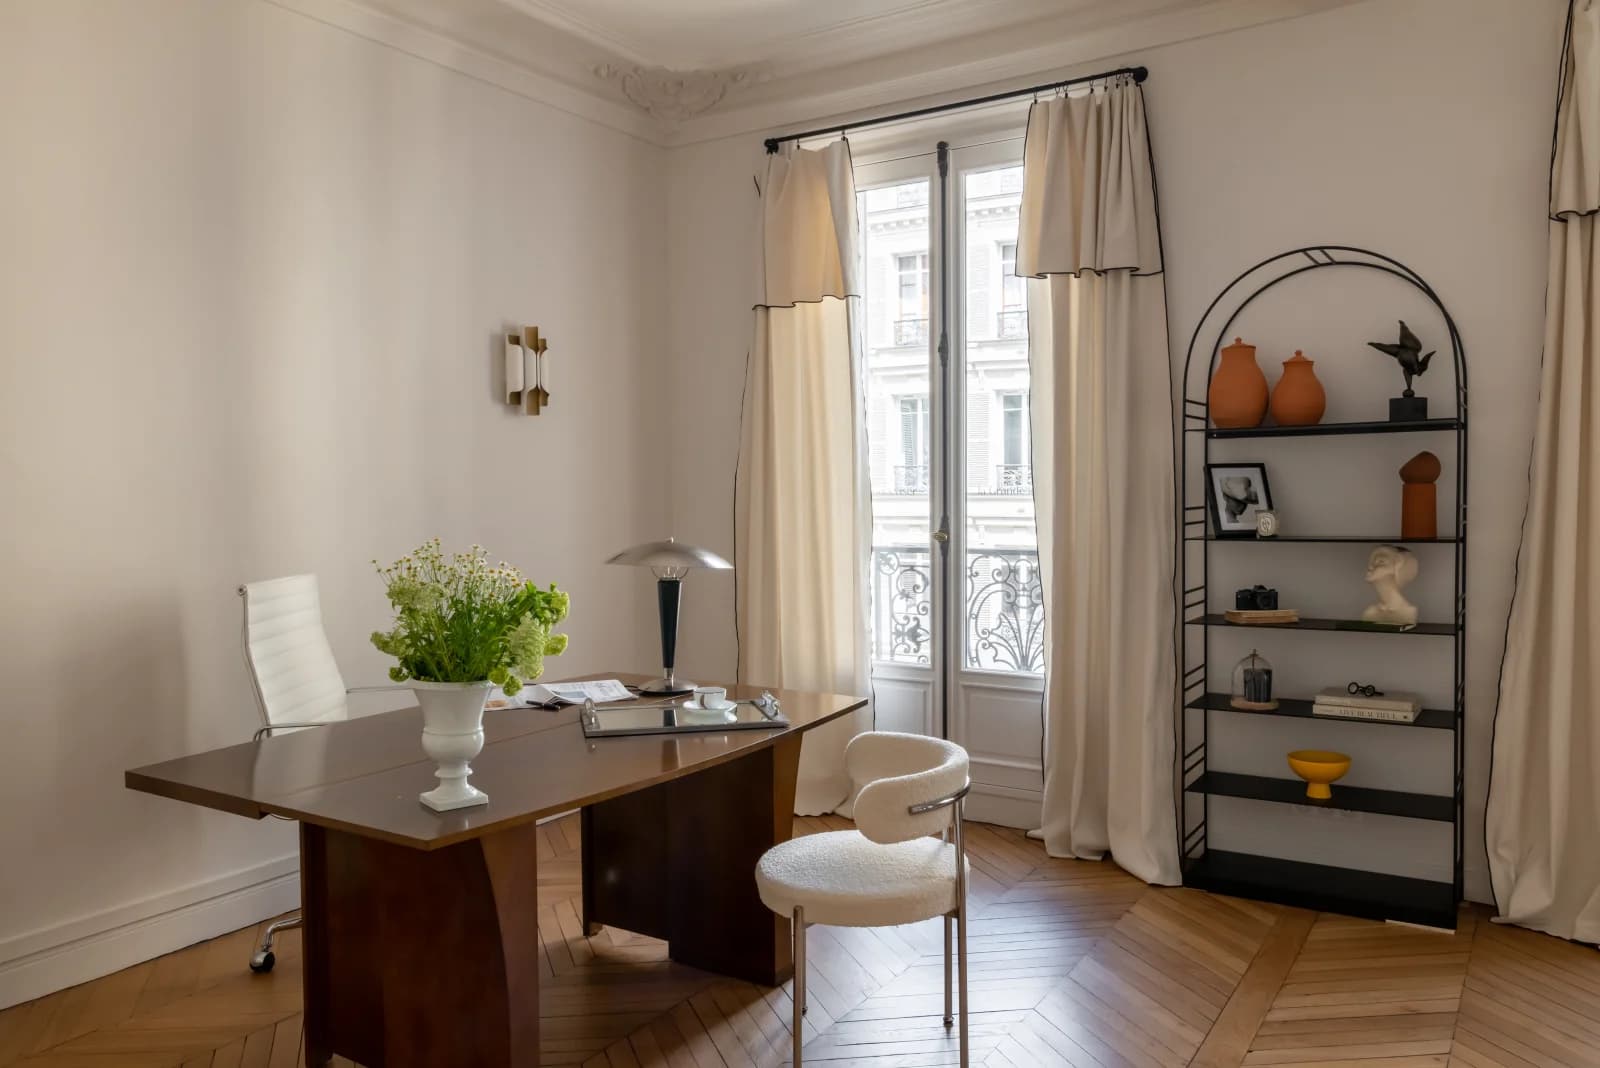 Space Parisian apartment with character - 1